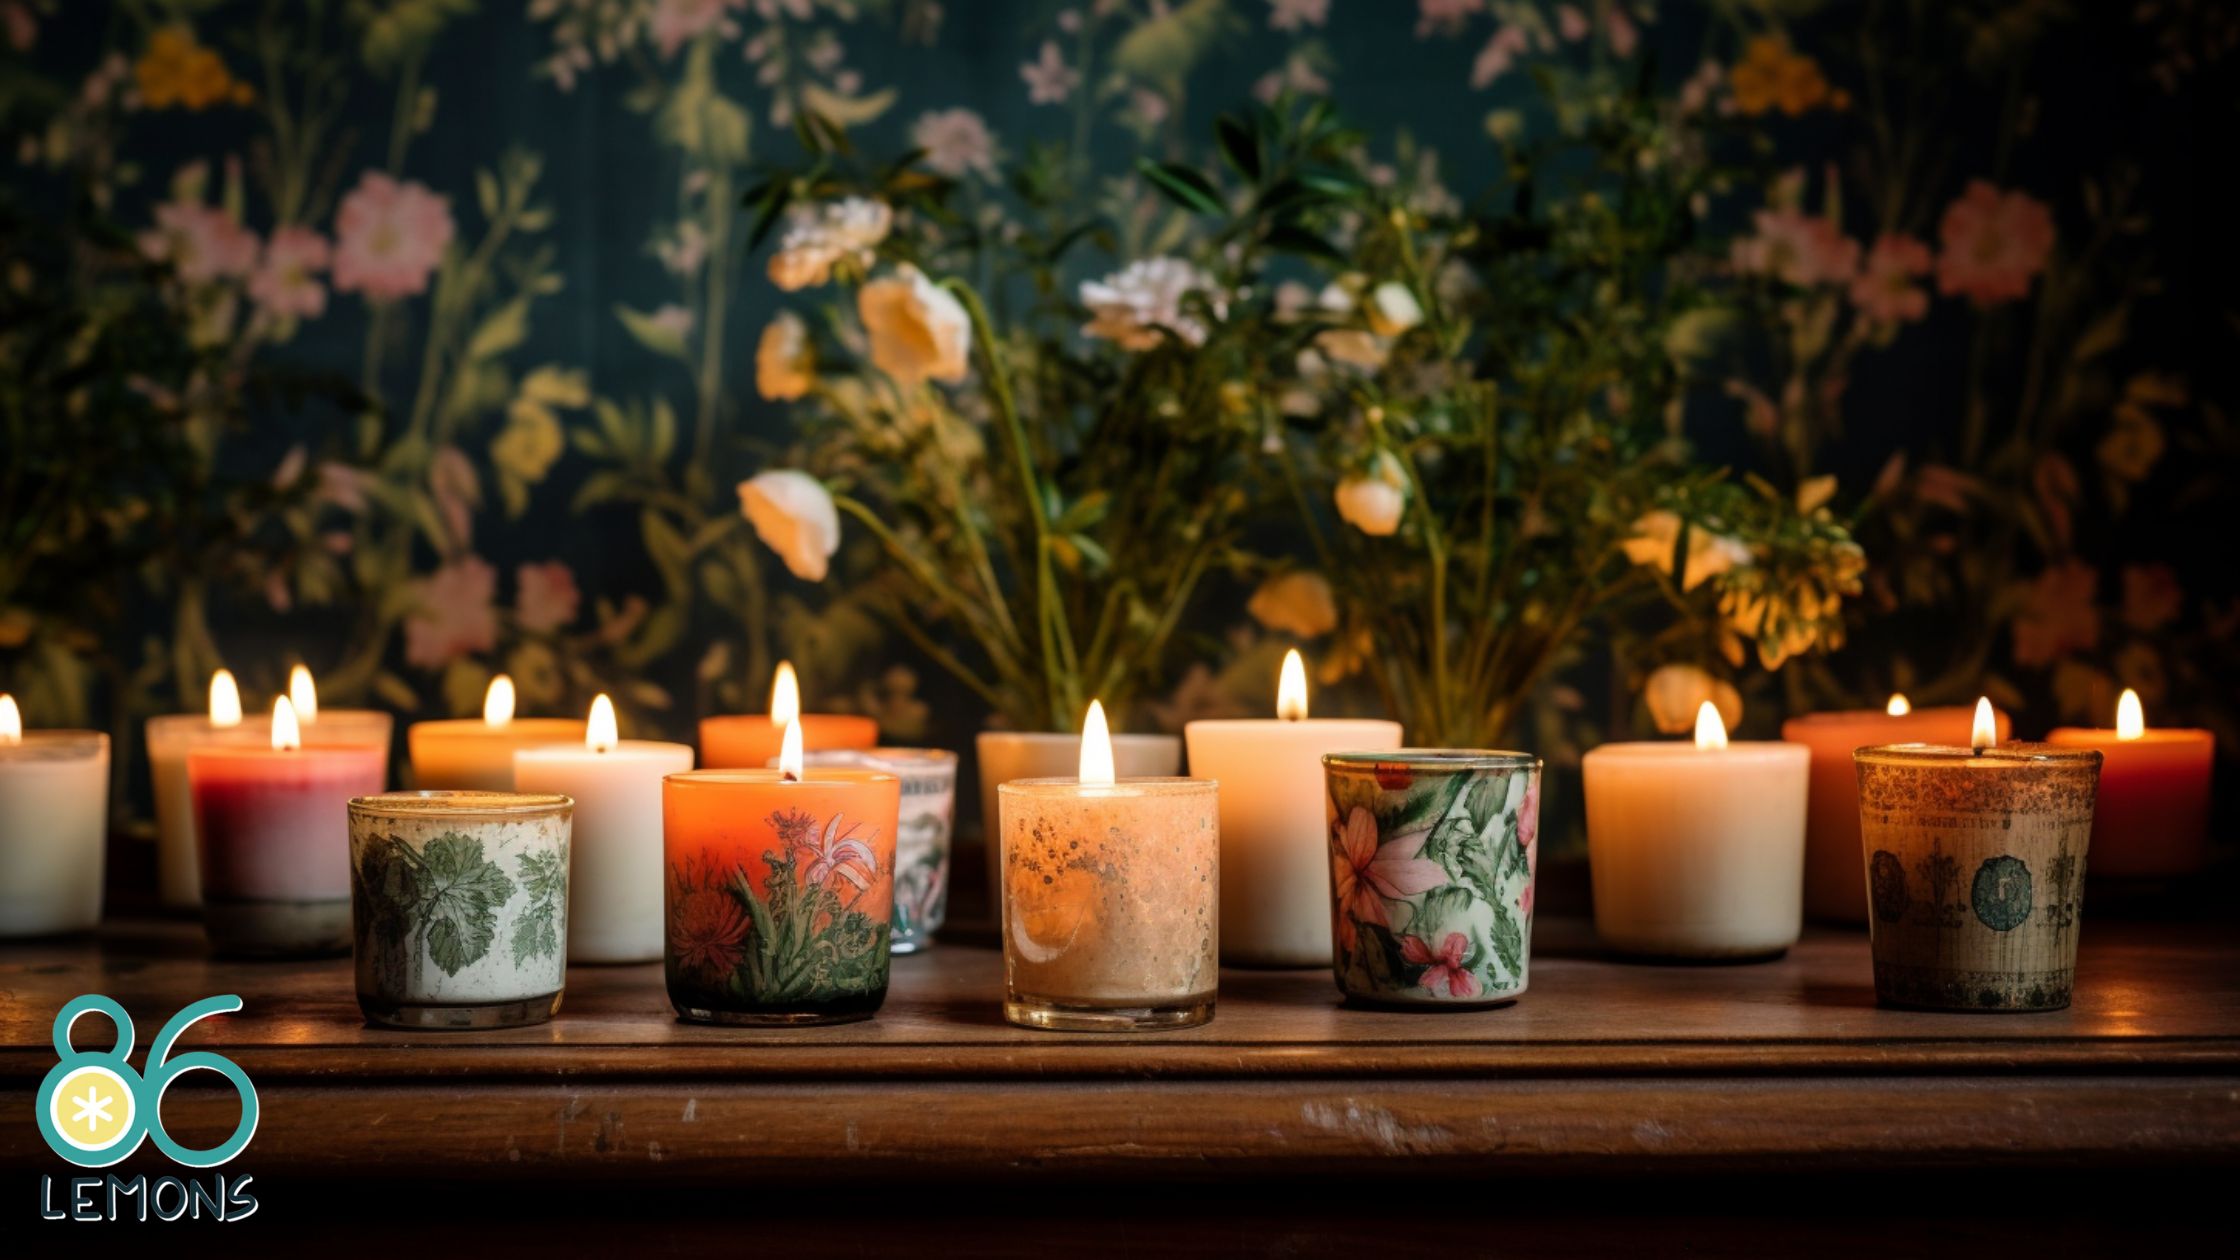 Add Color to Your Biodegradable Wax Candles with the Best Soy Wax